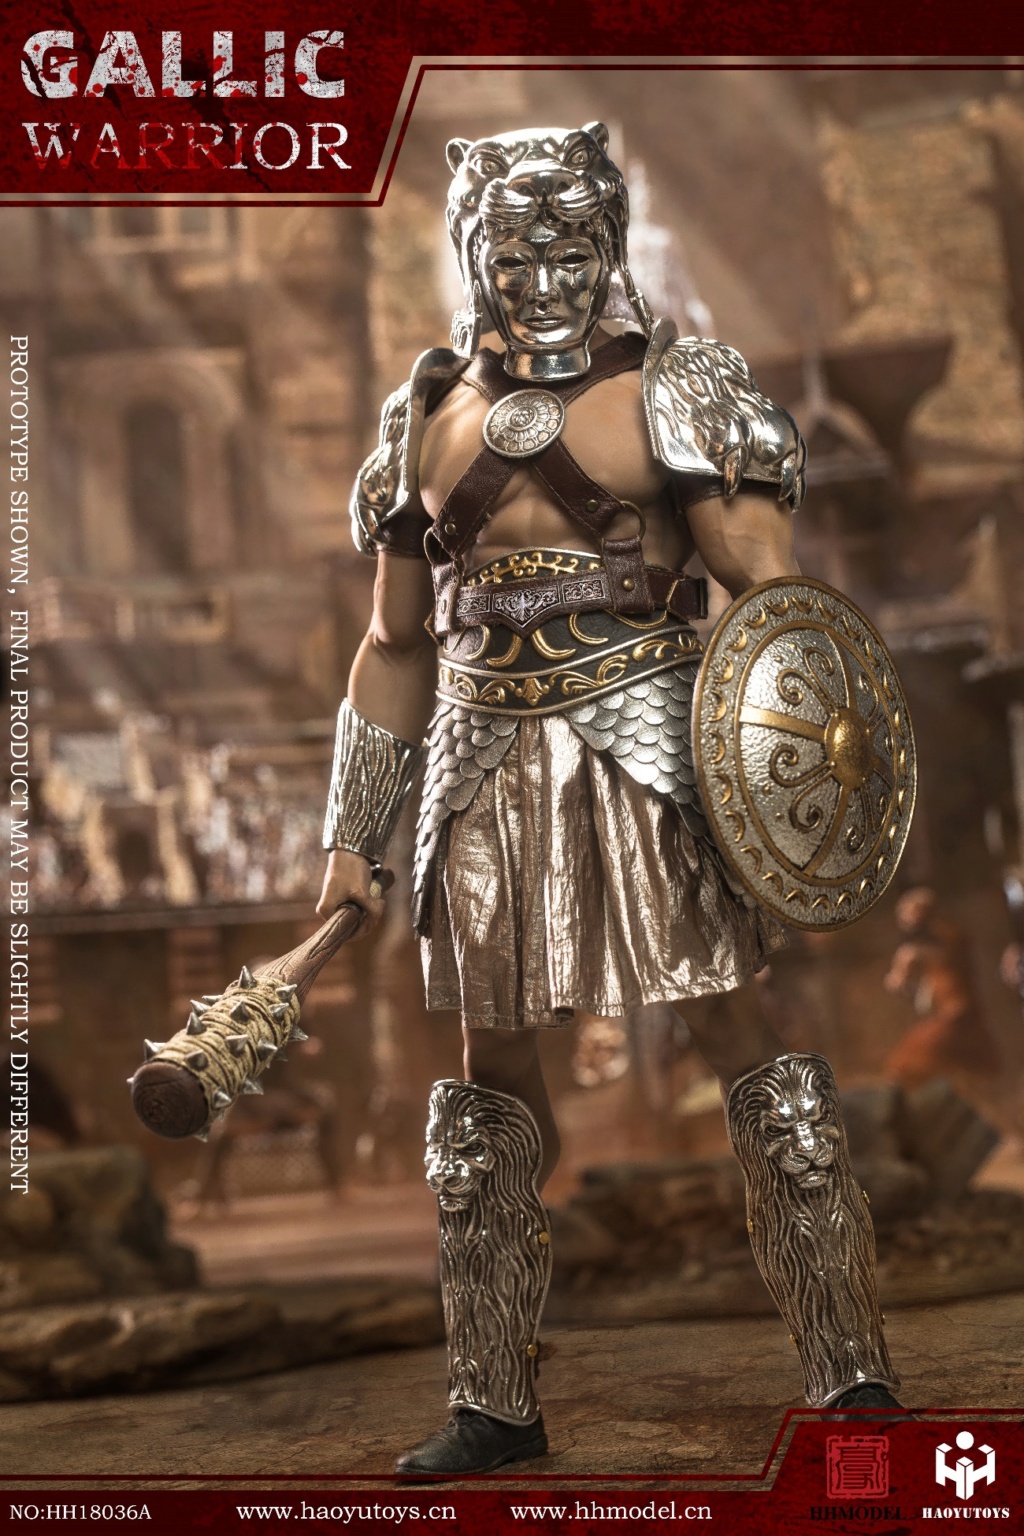 gladiator - NEW PRODUCT: HHMODEL & HAOYUTOYS : 1/6 Imperial Army Hunting Ground Fighter-Gaul Warrior Gold Armor/Silver Armor/Double Set 09052010